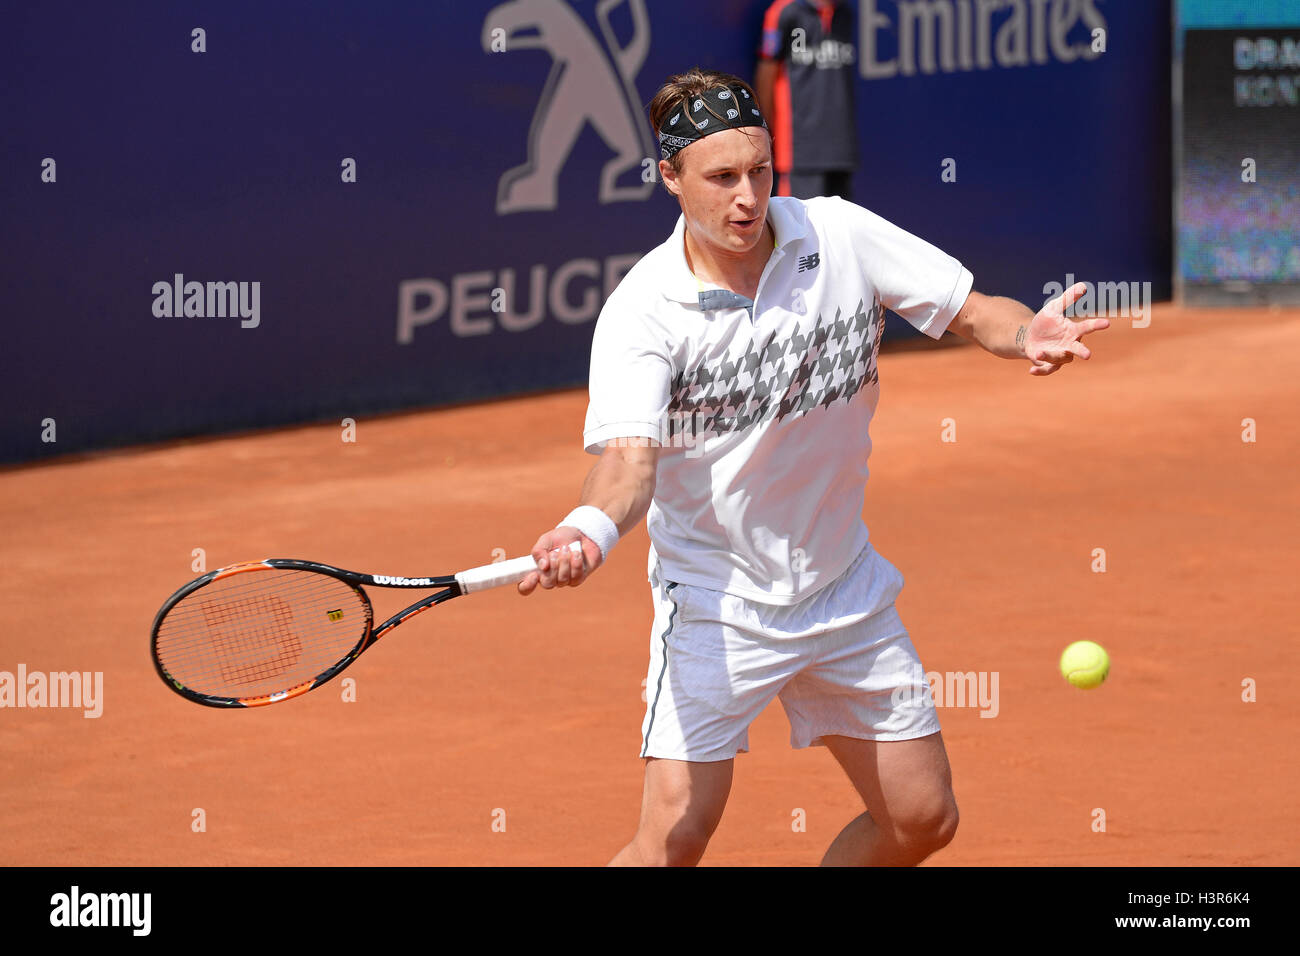 BARCELONA - APR 24: Henri Kontinen (tennis player from Finland) plays at  the ATP Barcelona Open Banc Sabadell Stock Photo - Alamy